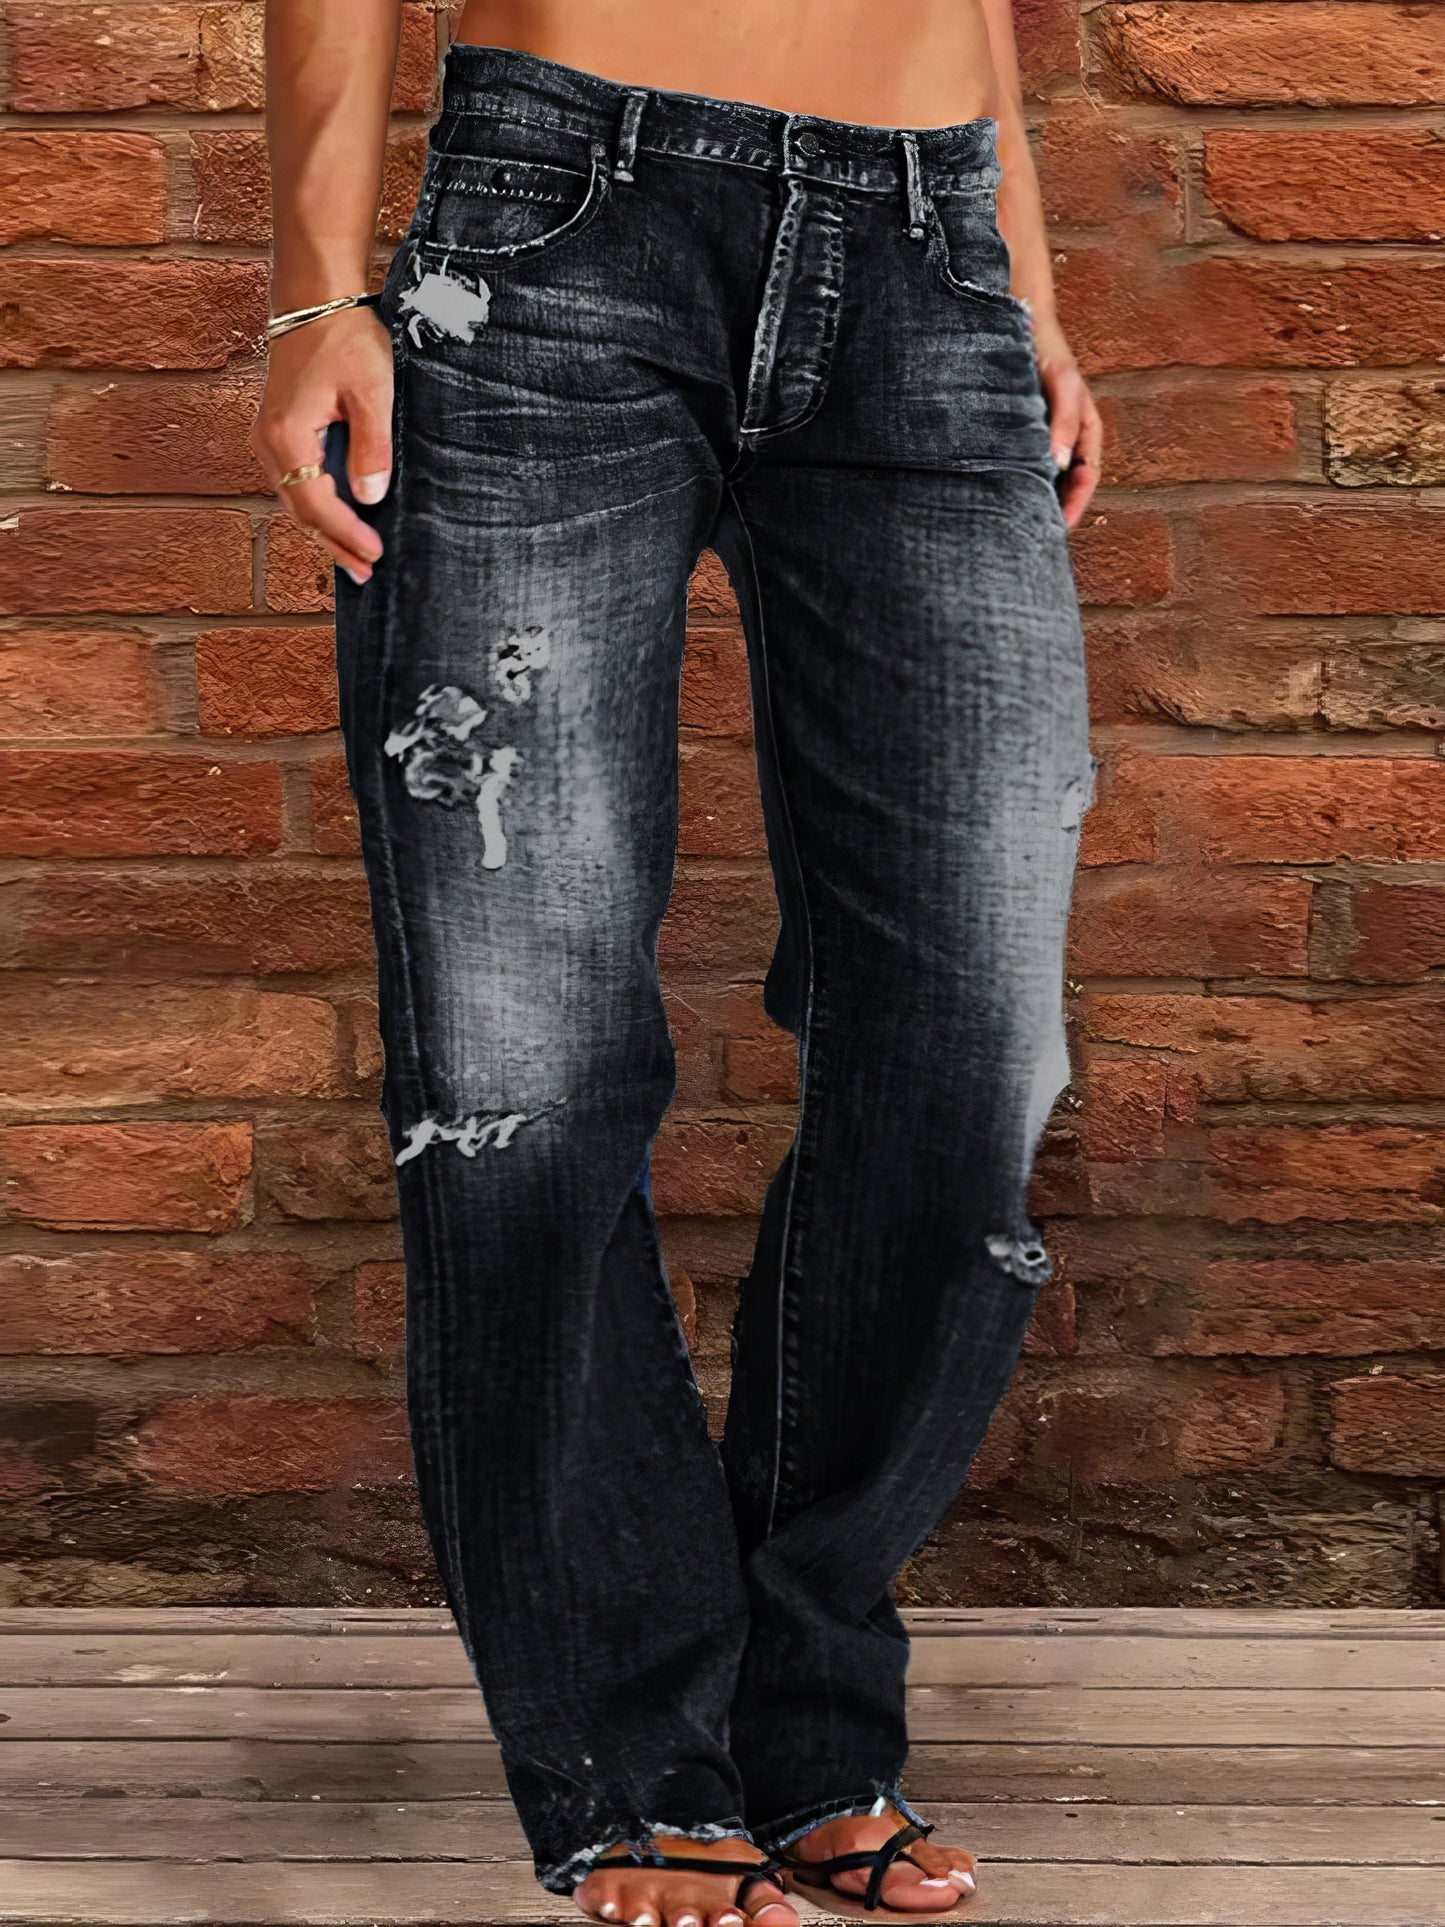 Jeans - Stretch Ripped Washed Casual Straight Jeans - MsDressly